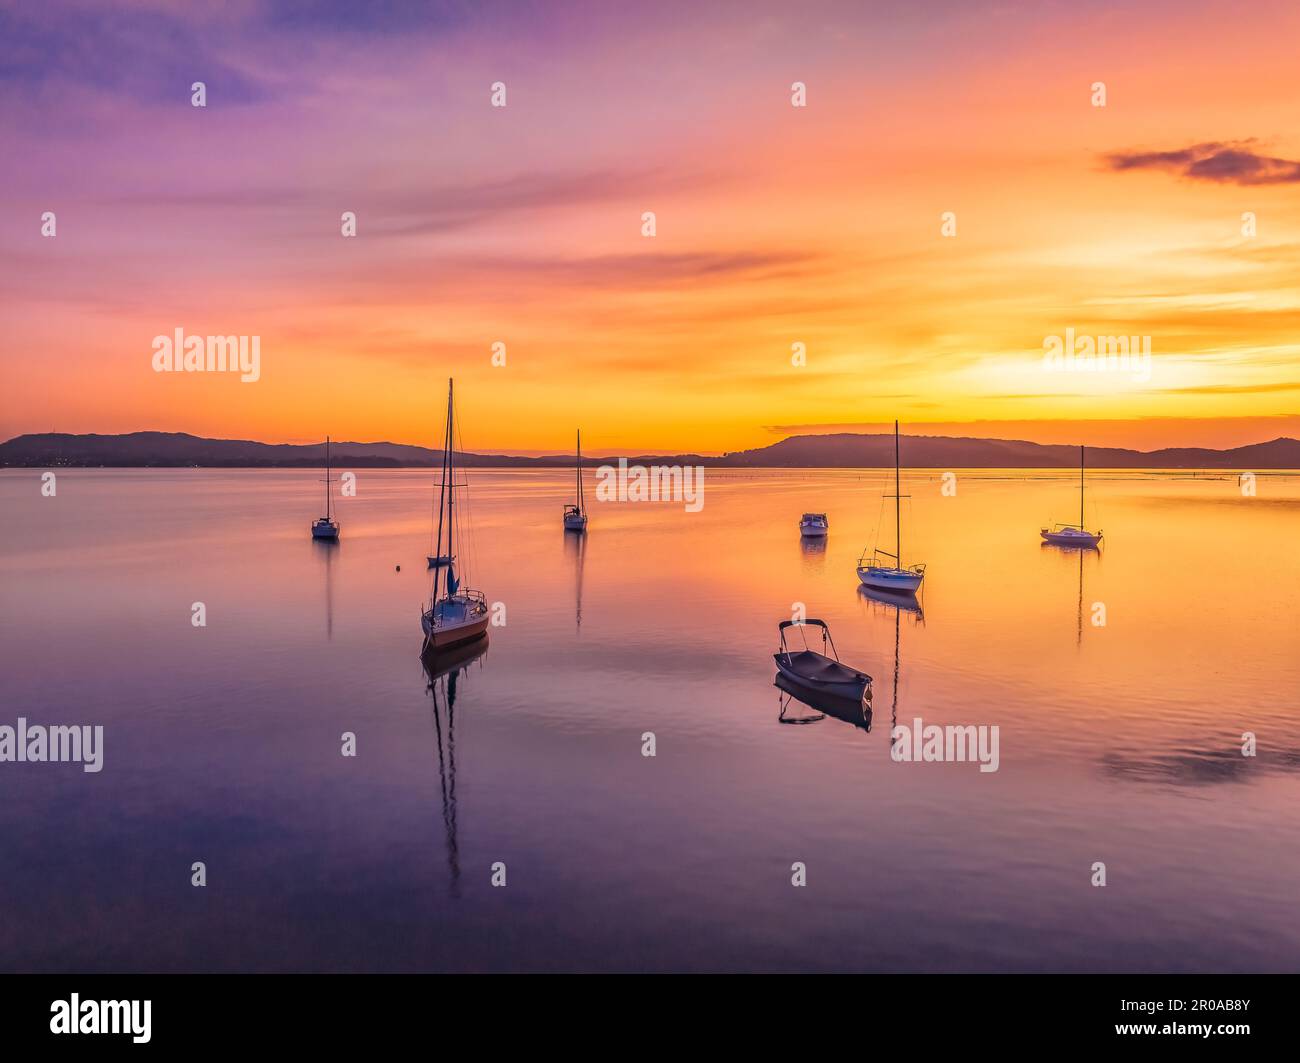 Sunrise over Brisbane Water at Couche Park, Koolewong on the Central Coast, NSW, Australia. Stock Photo